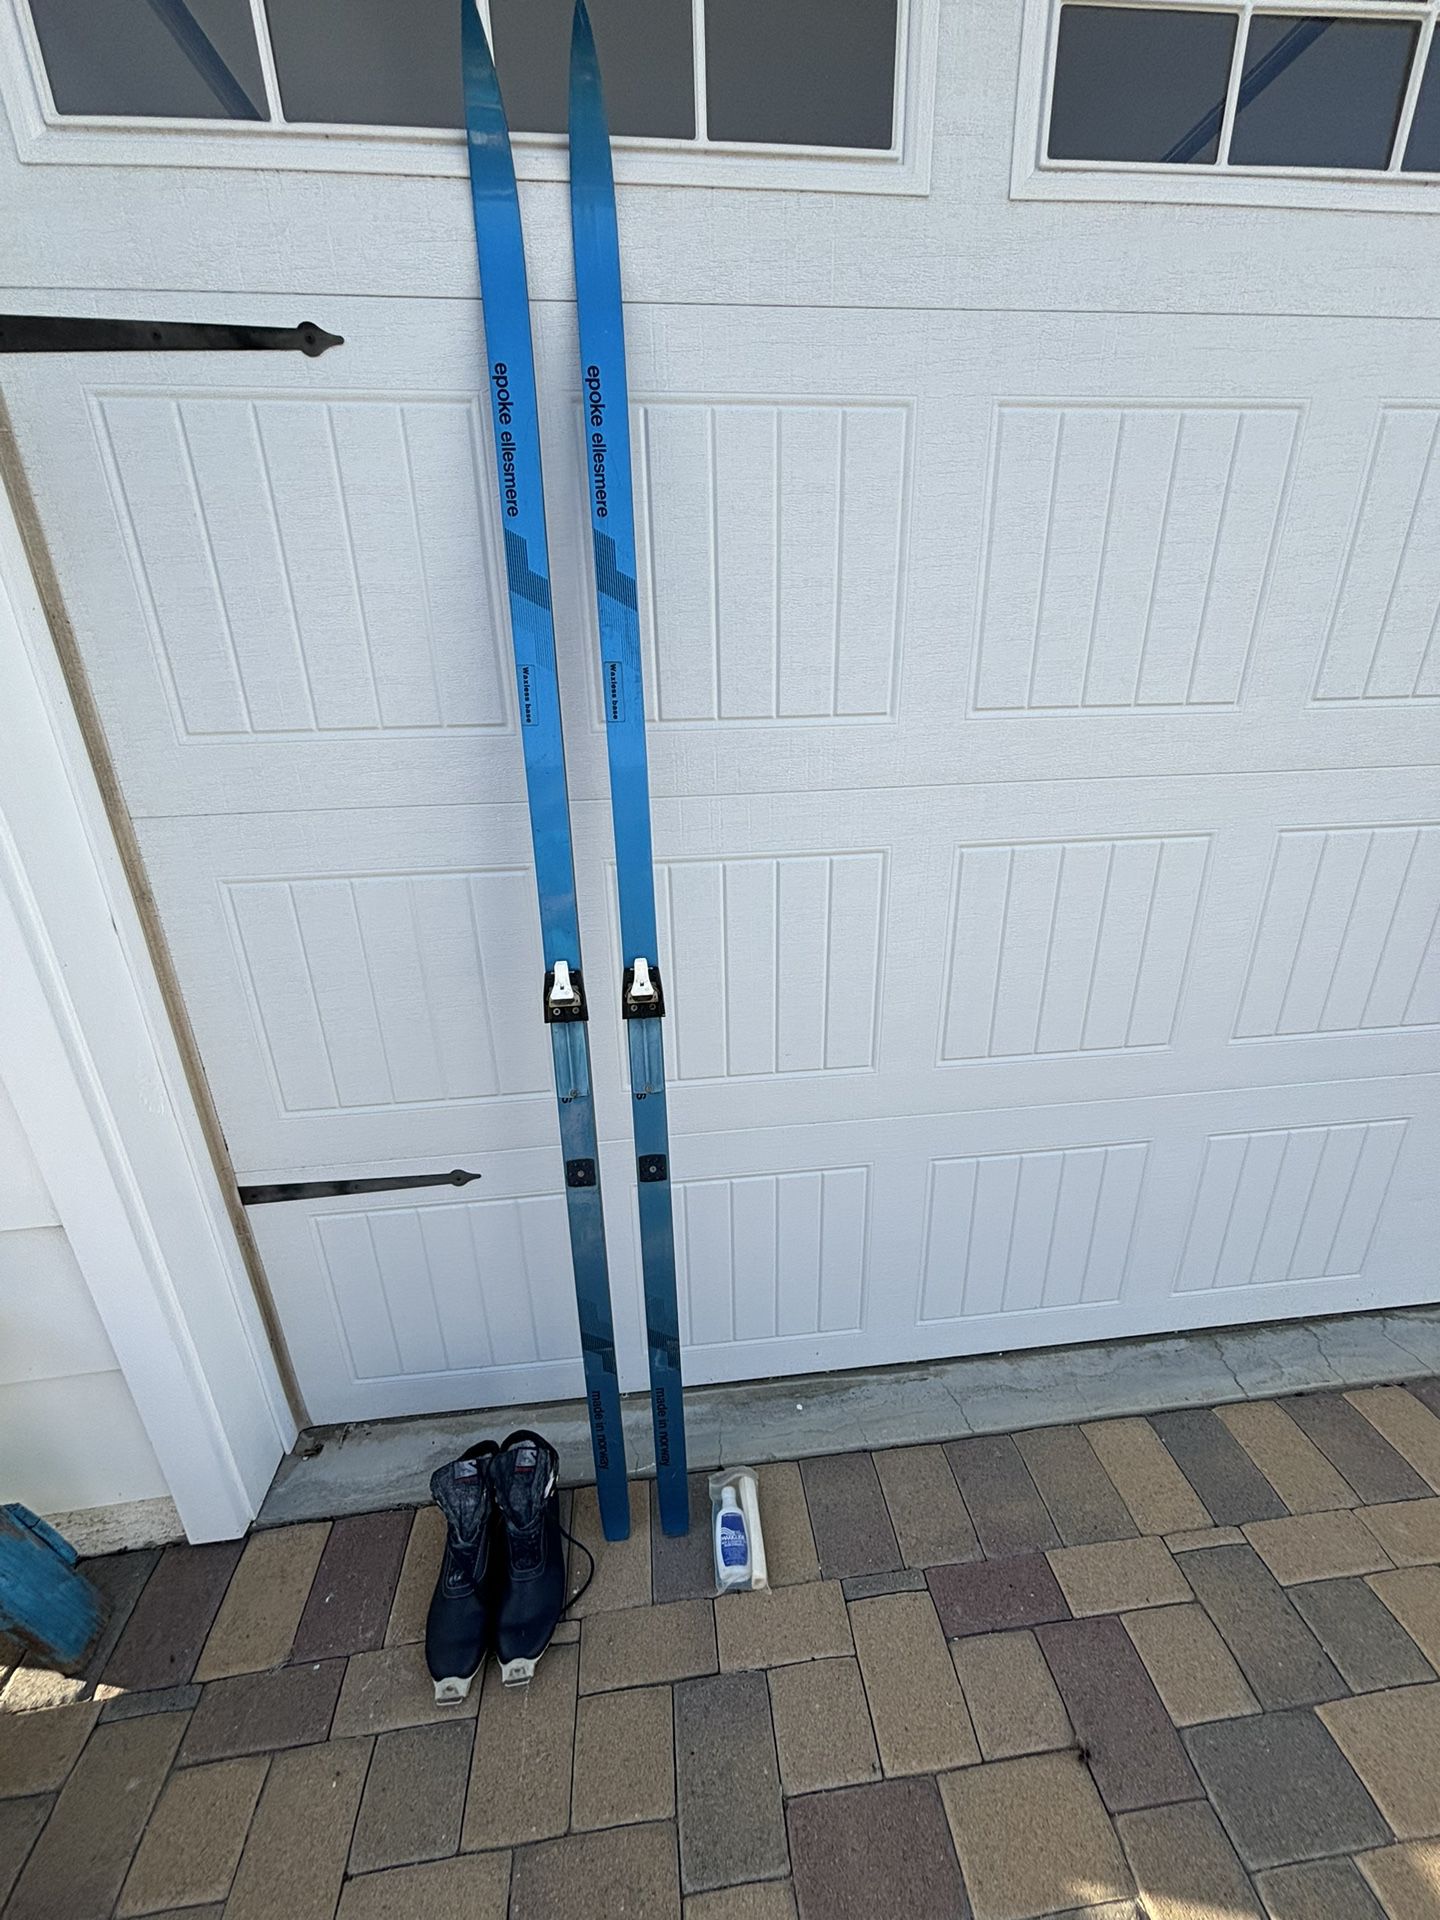 Cross country skis with free Solomon size 10 boots.